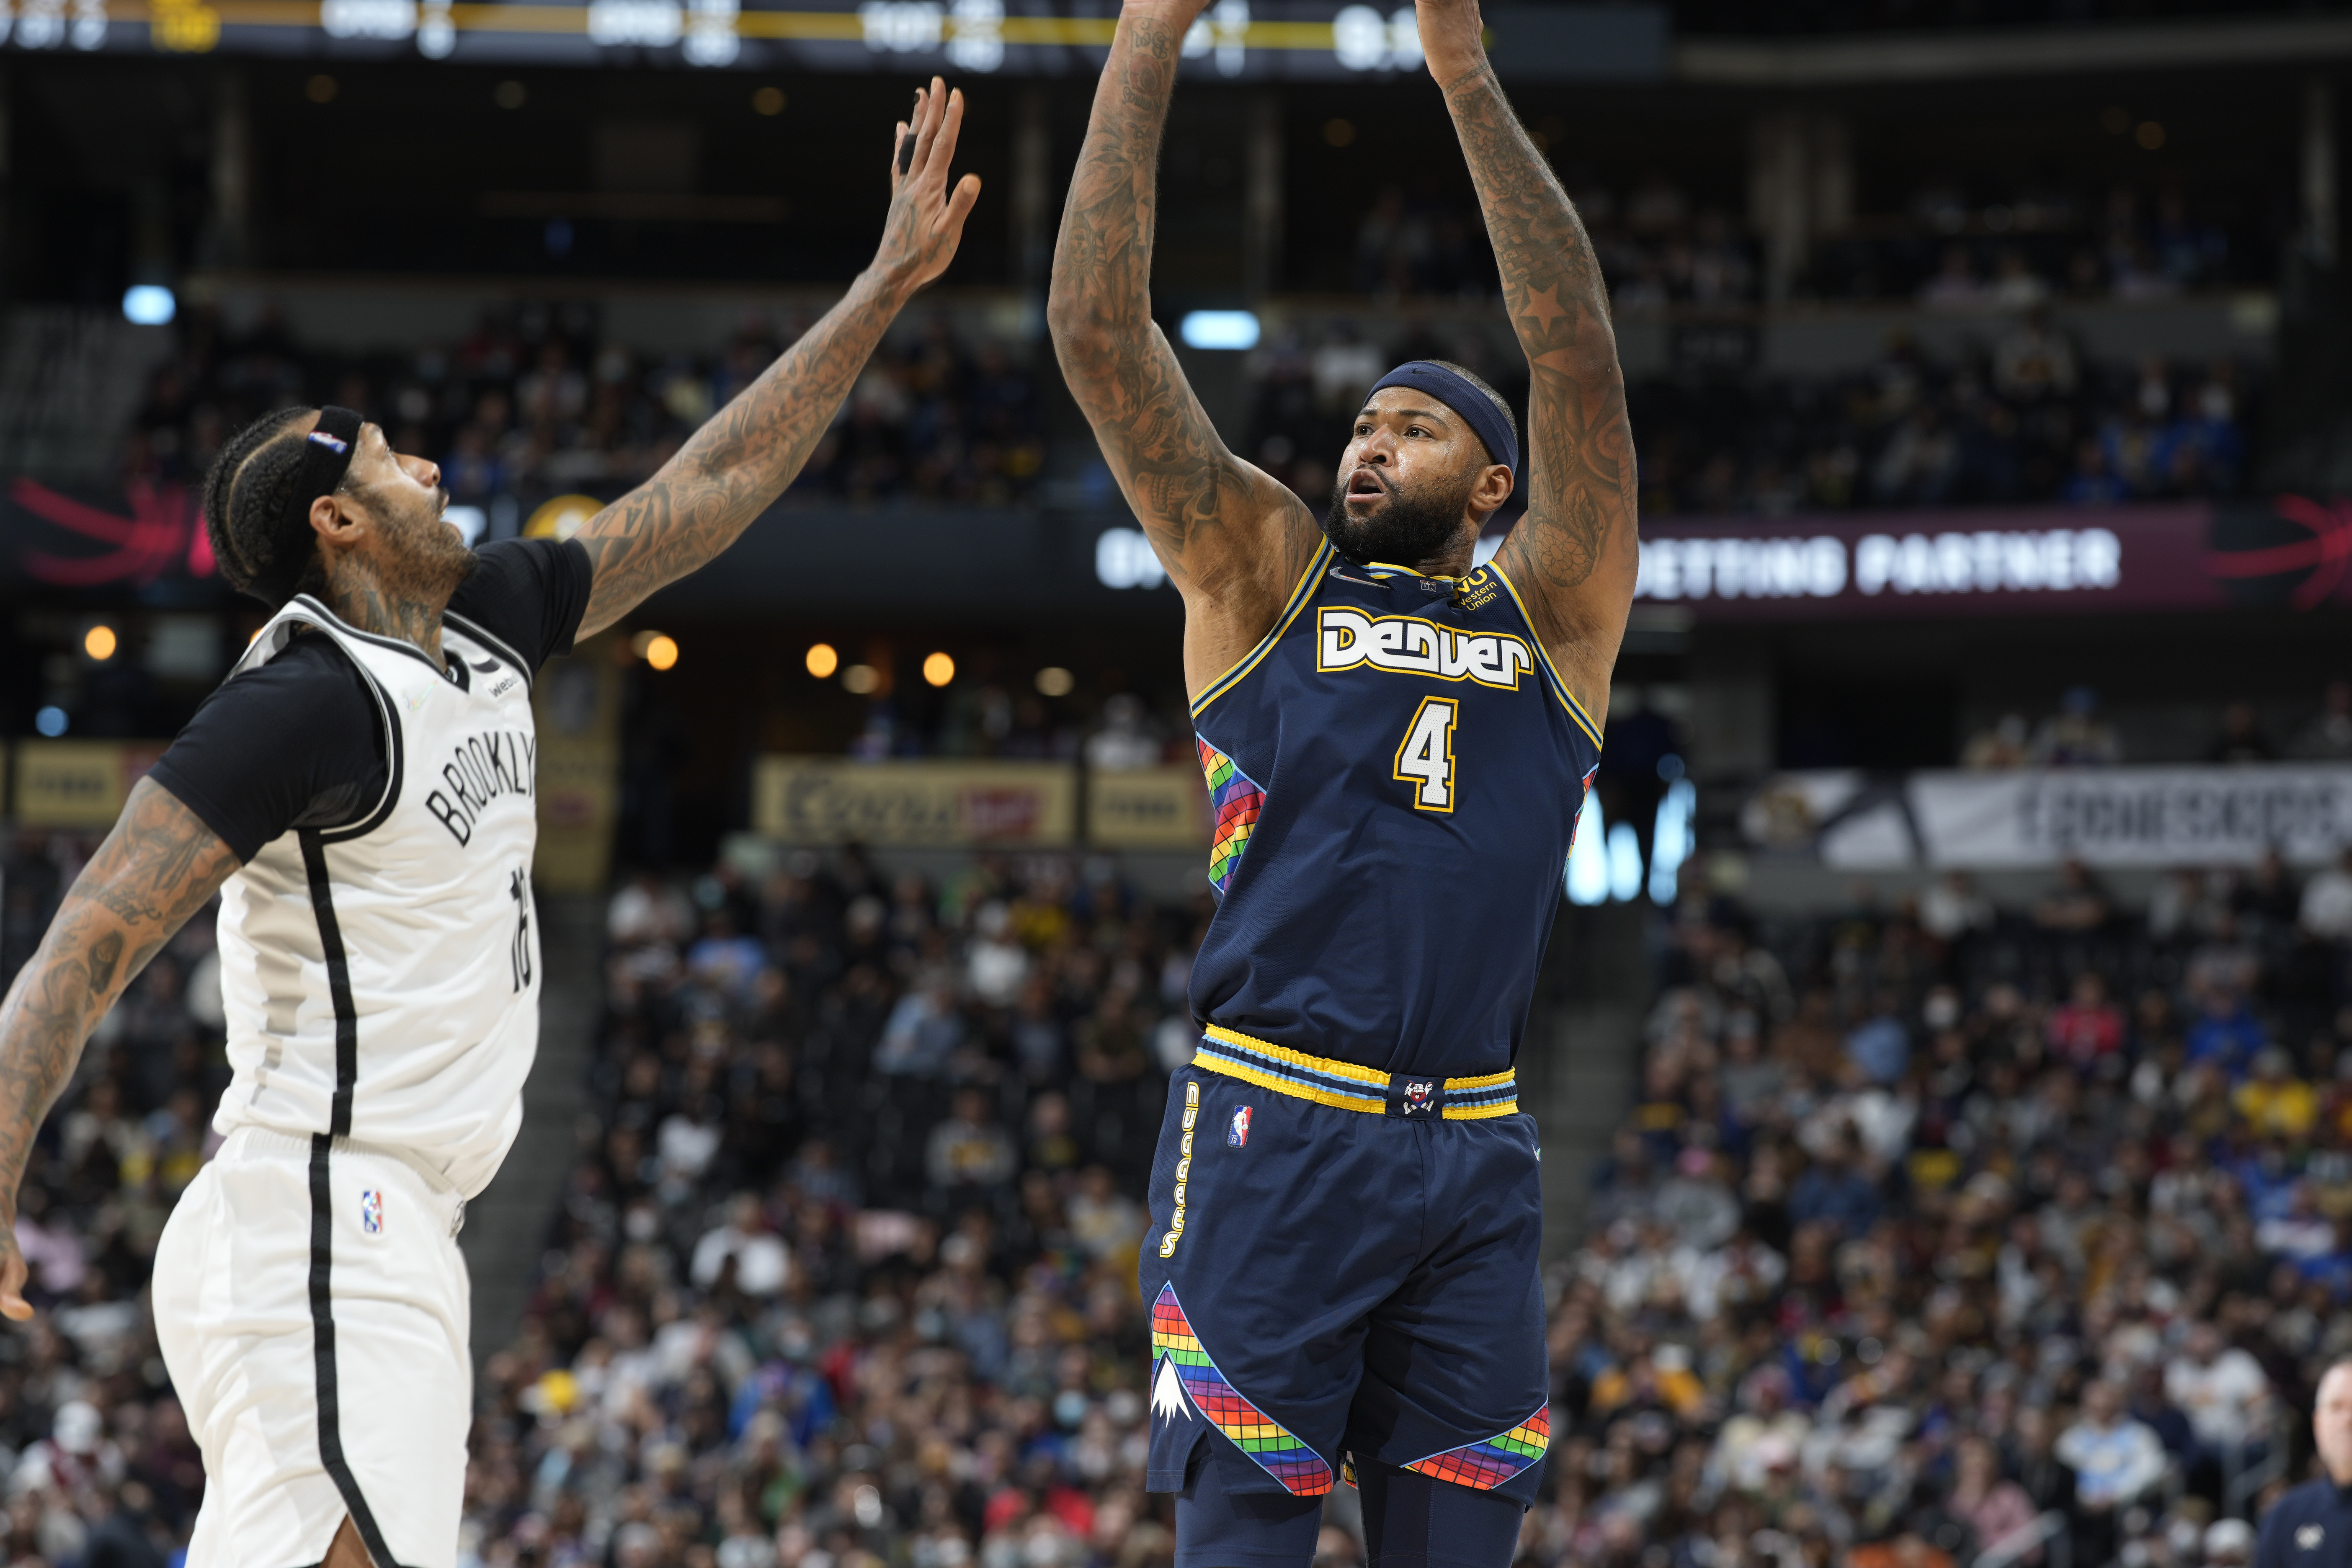 Nuggets planning to sign DeMarcus Cousins to 10-day contract